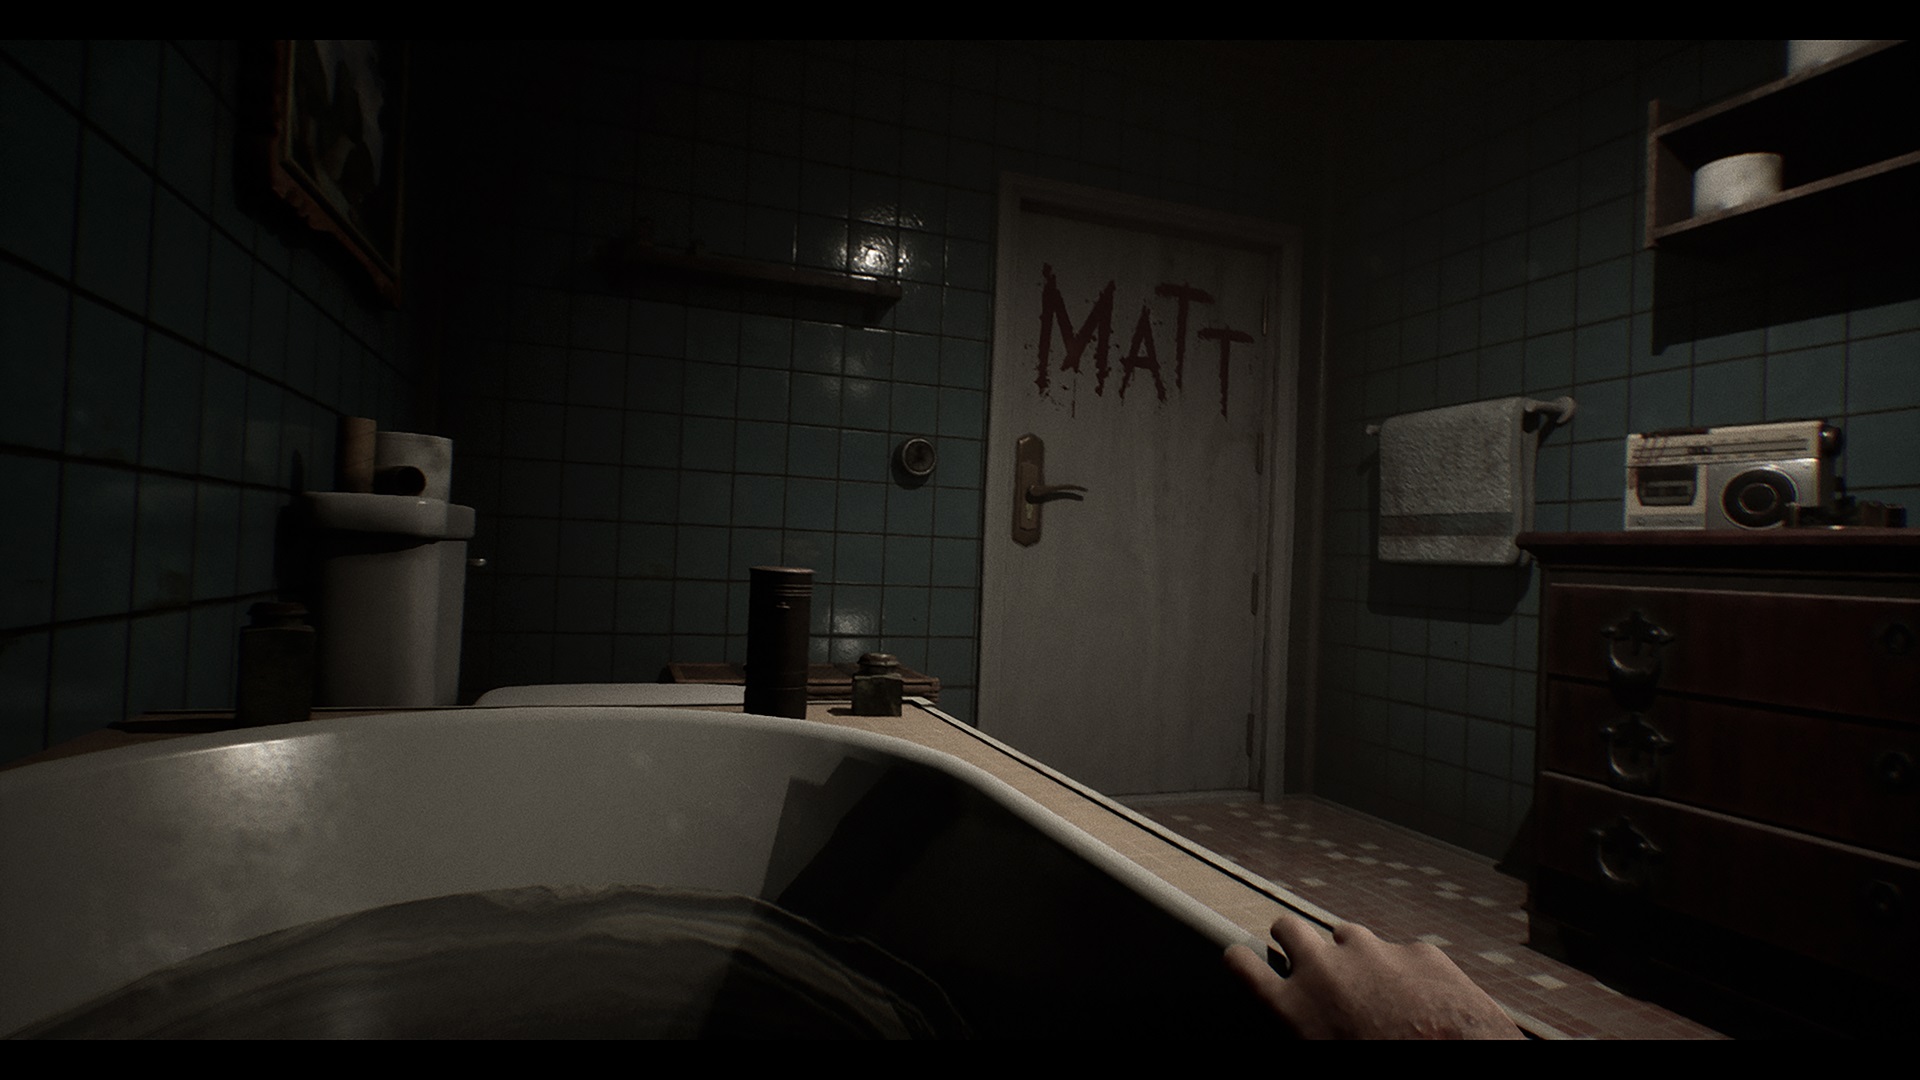 The Motel Opens its Doors. Will You Make It out from Oxide? - Xbox Wire